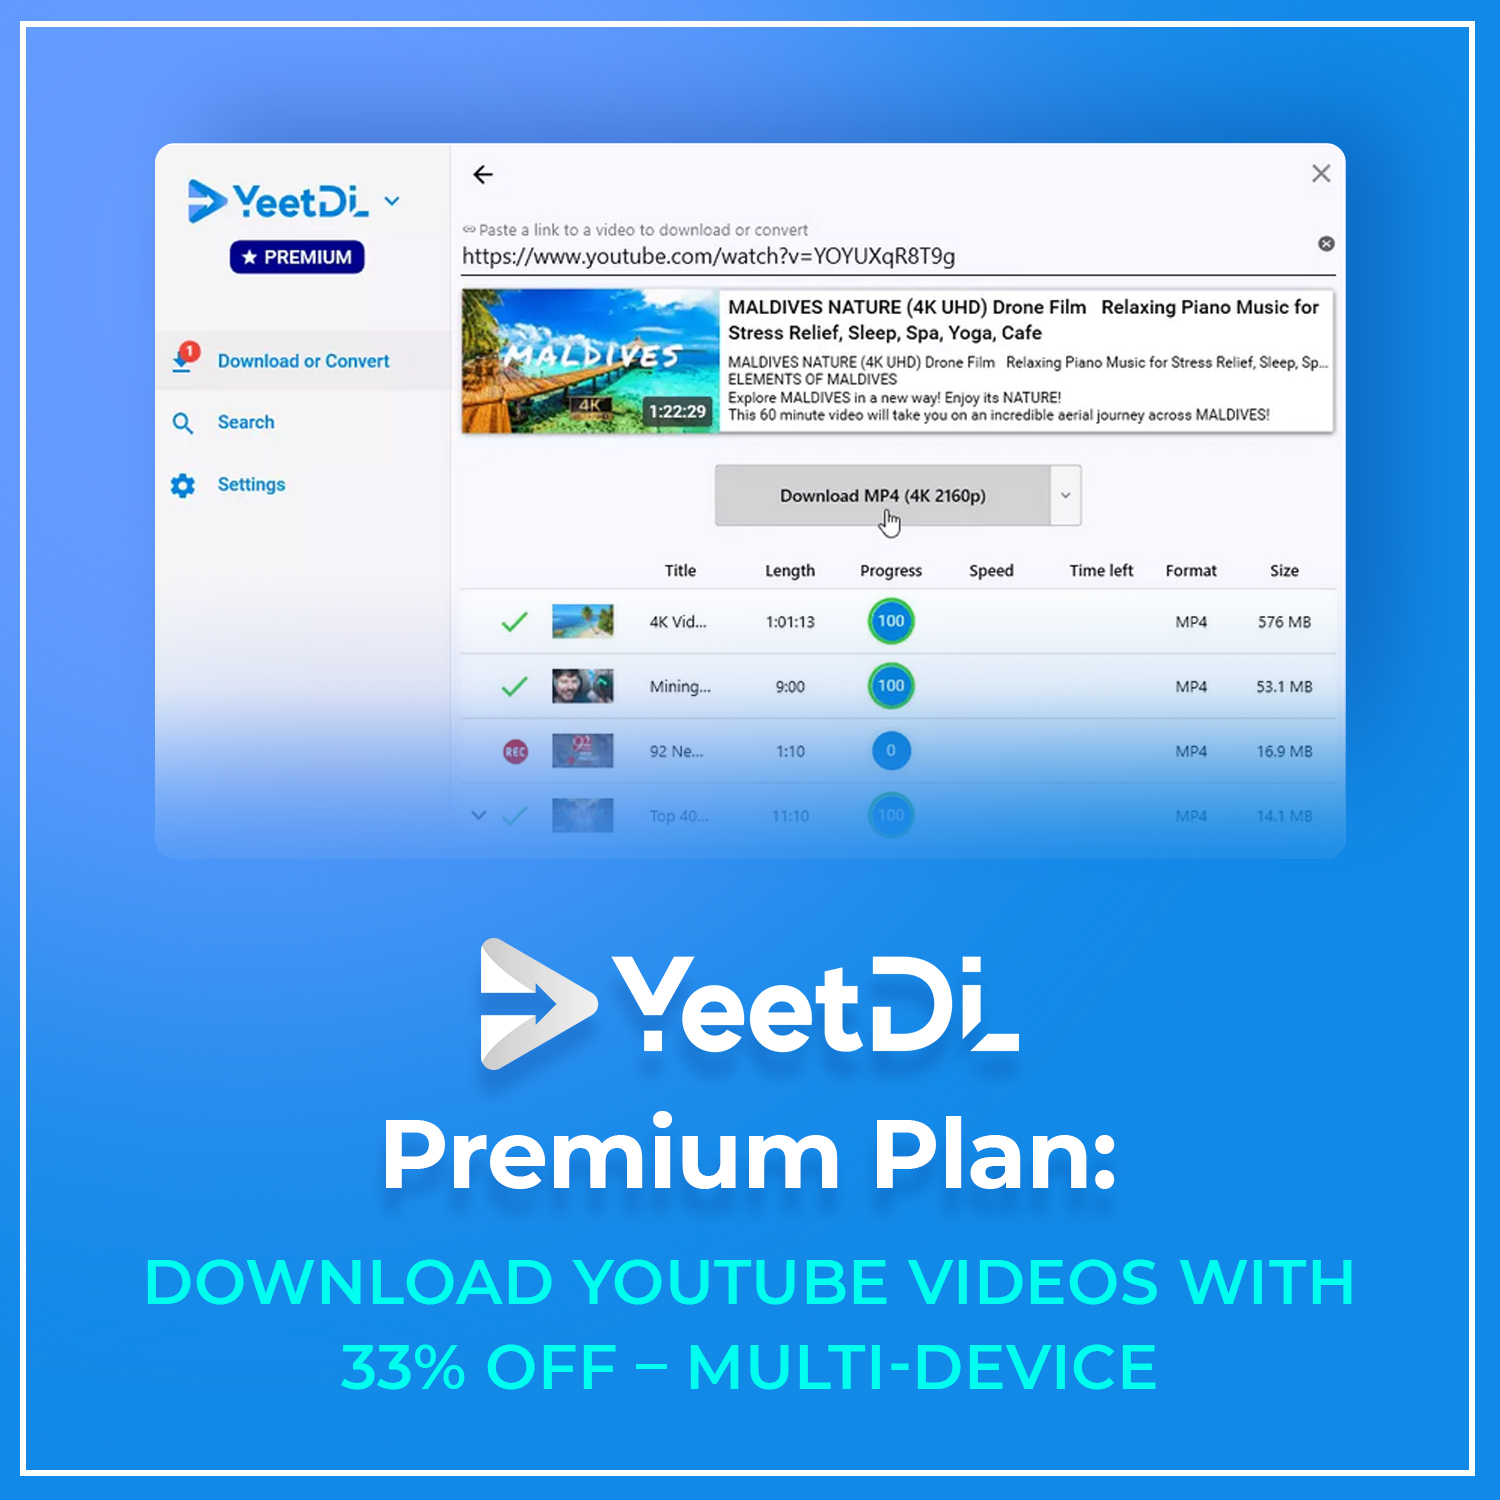 YeetDL Premium Plan: Download YouTube videos with 33% OFF - (Multi-Device) cover image.